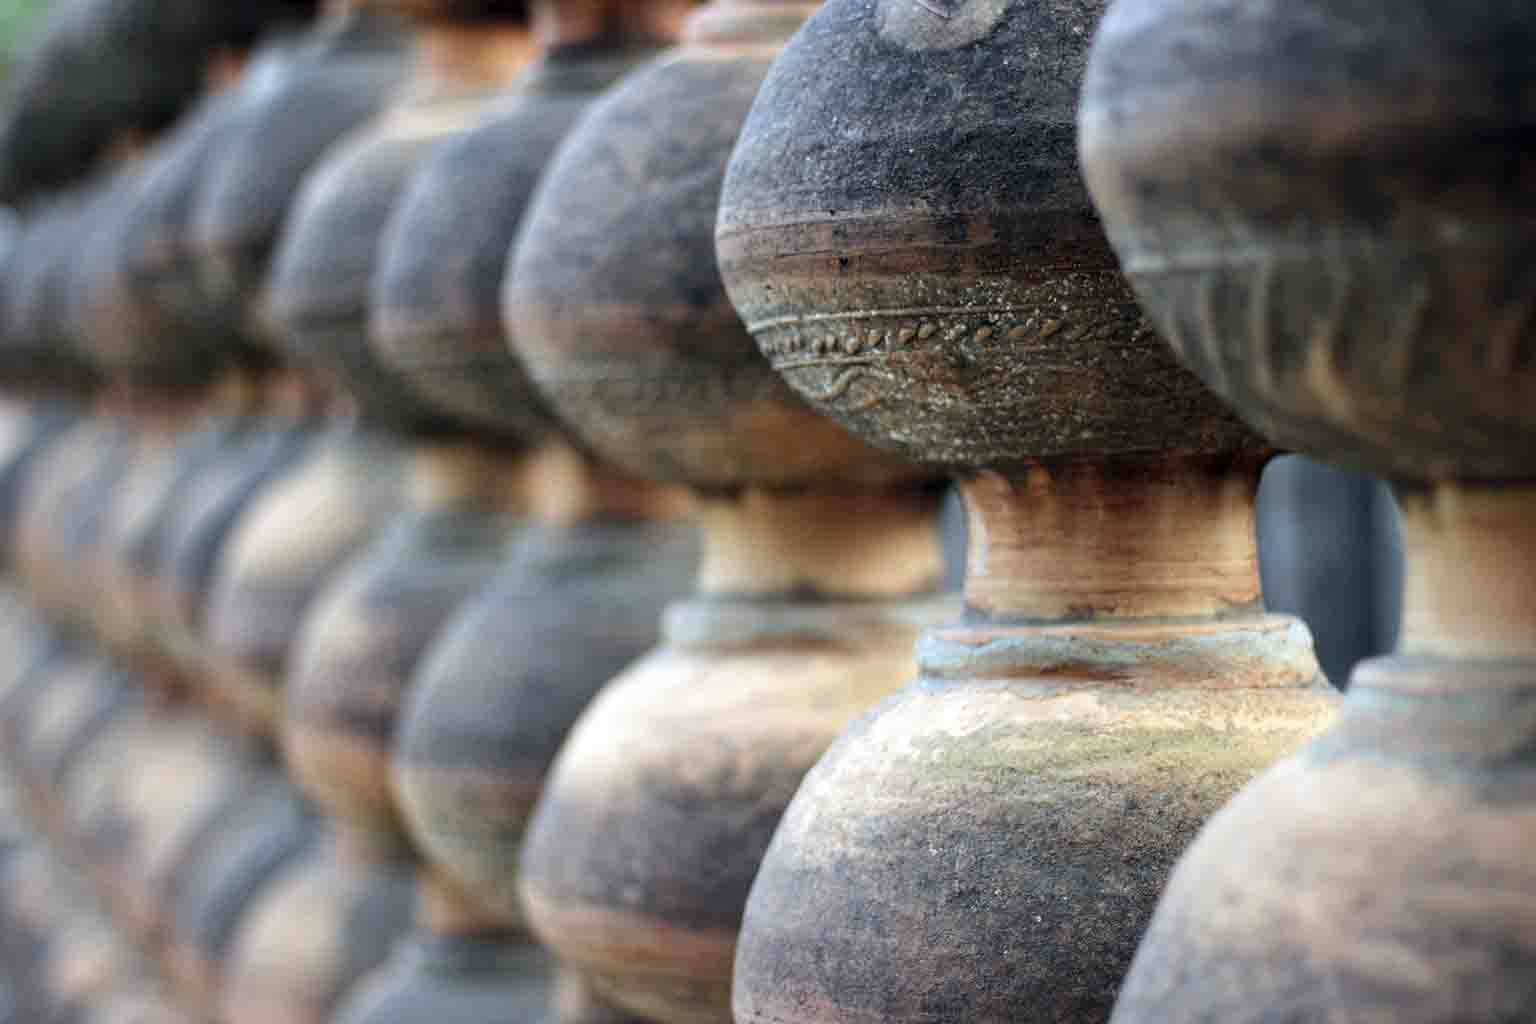 A row of pottery